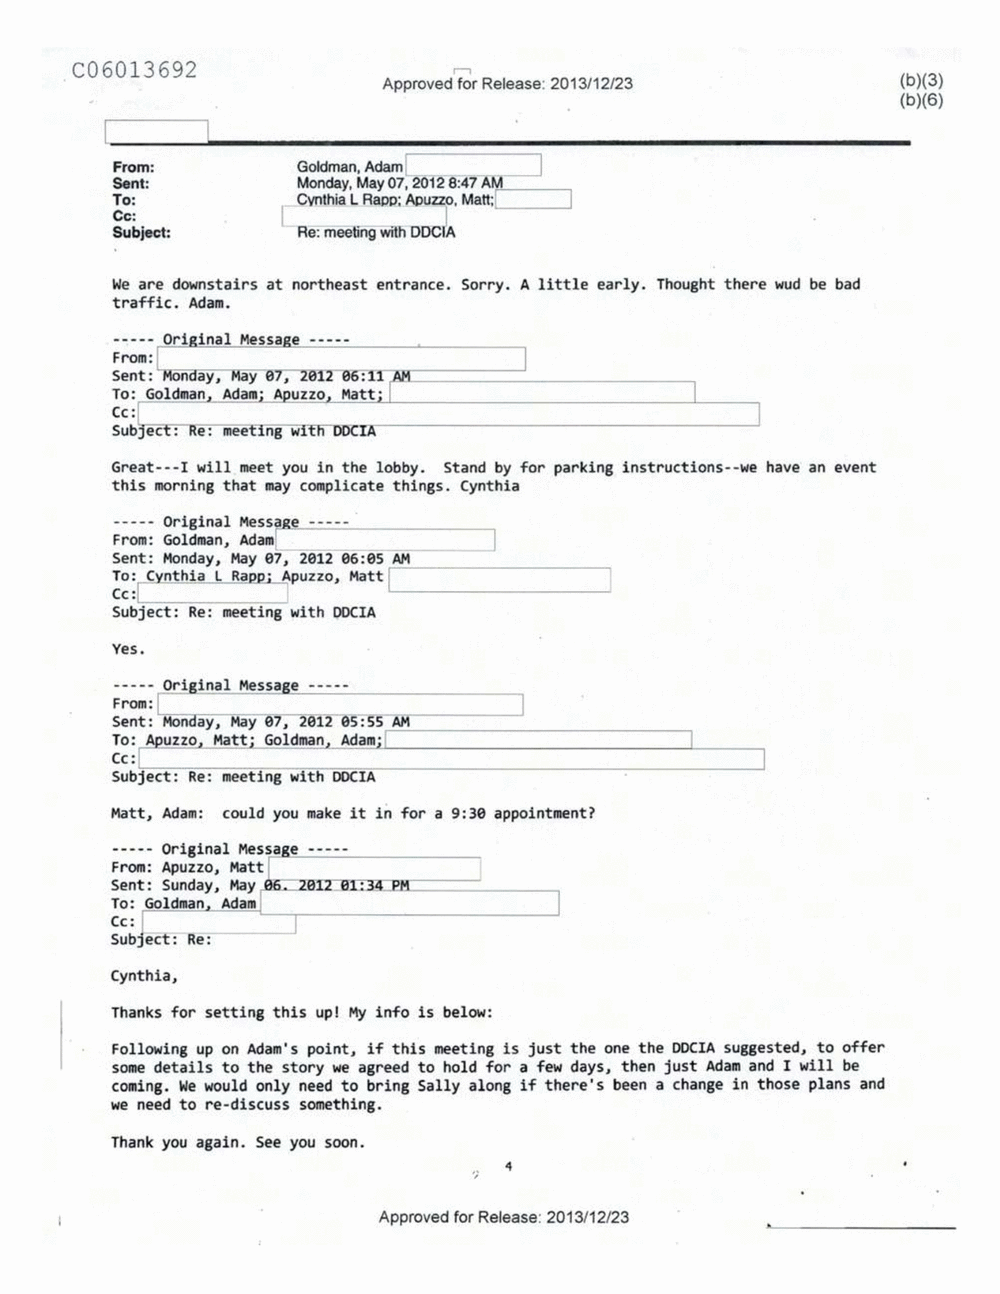 Page 552 from Email Correspondence Between Reporters and CIA Flacks